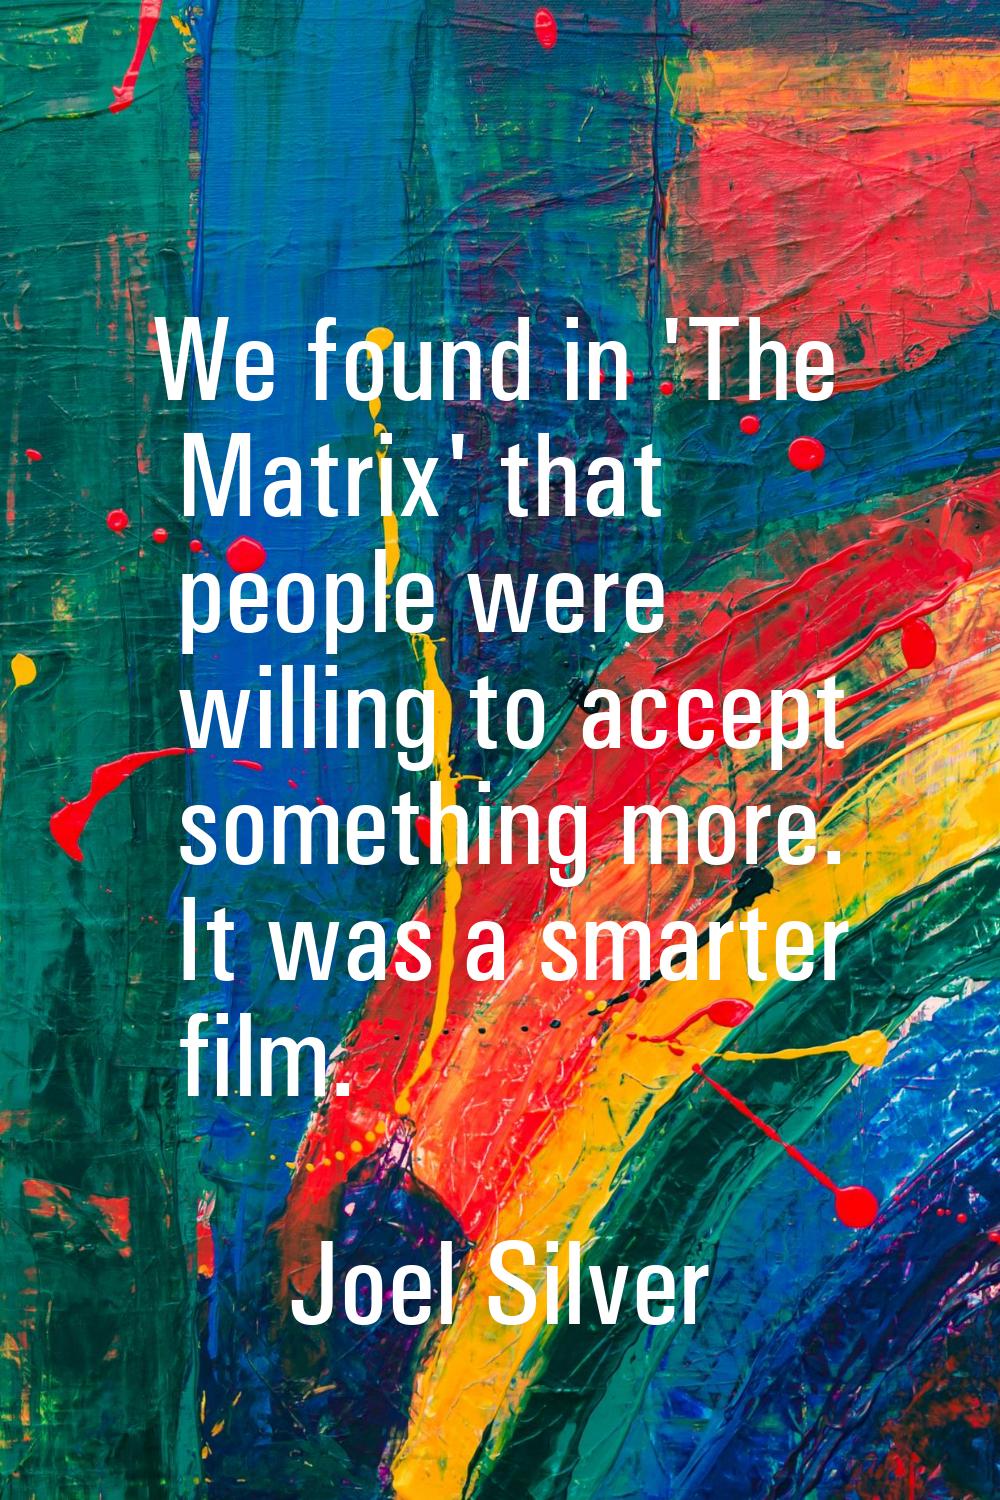 We found in 'The Matrix' that people were willing to accept something more. It was a smarter film.